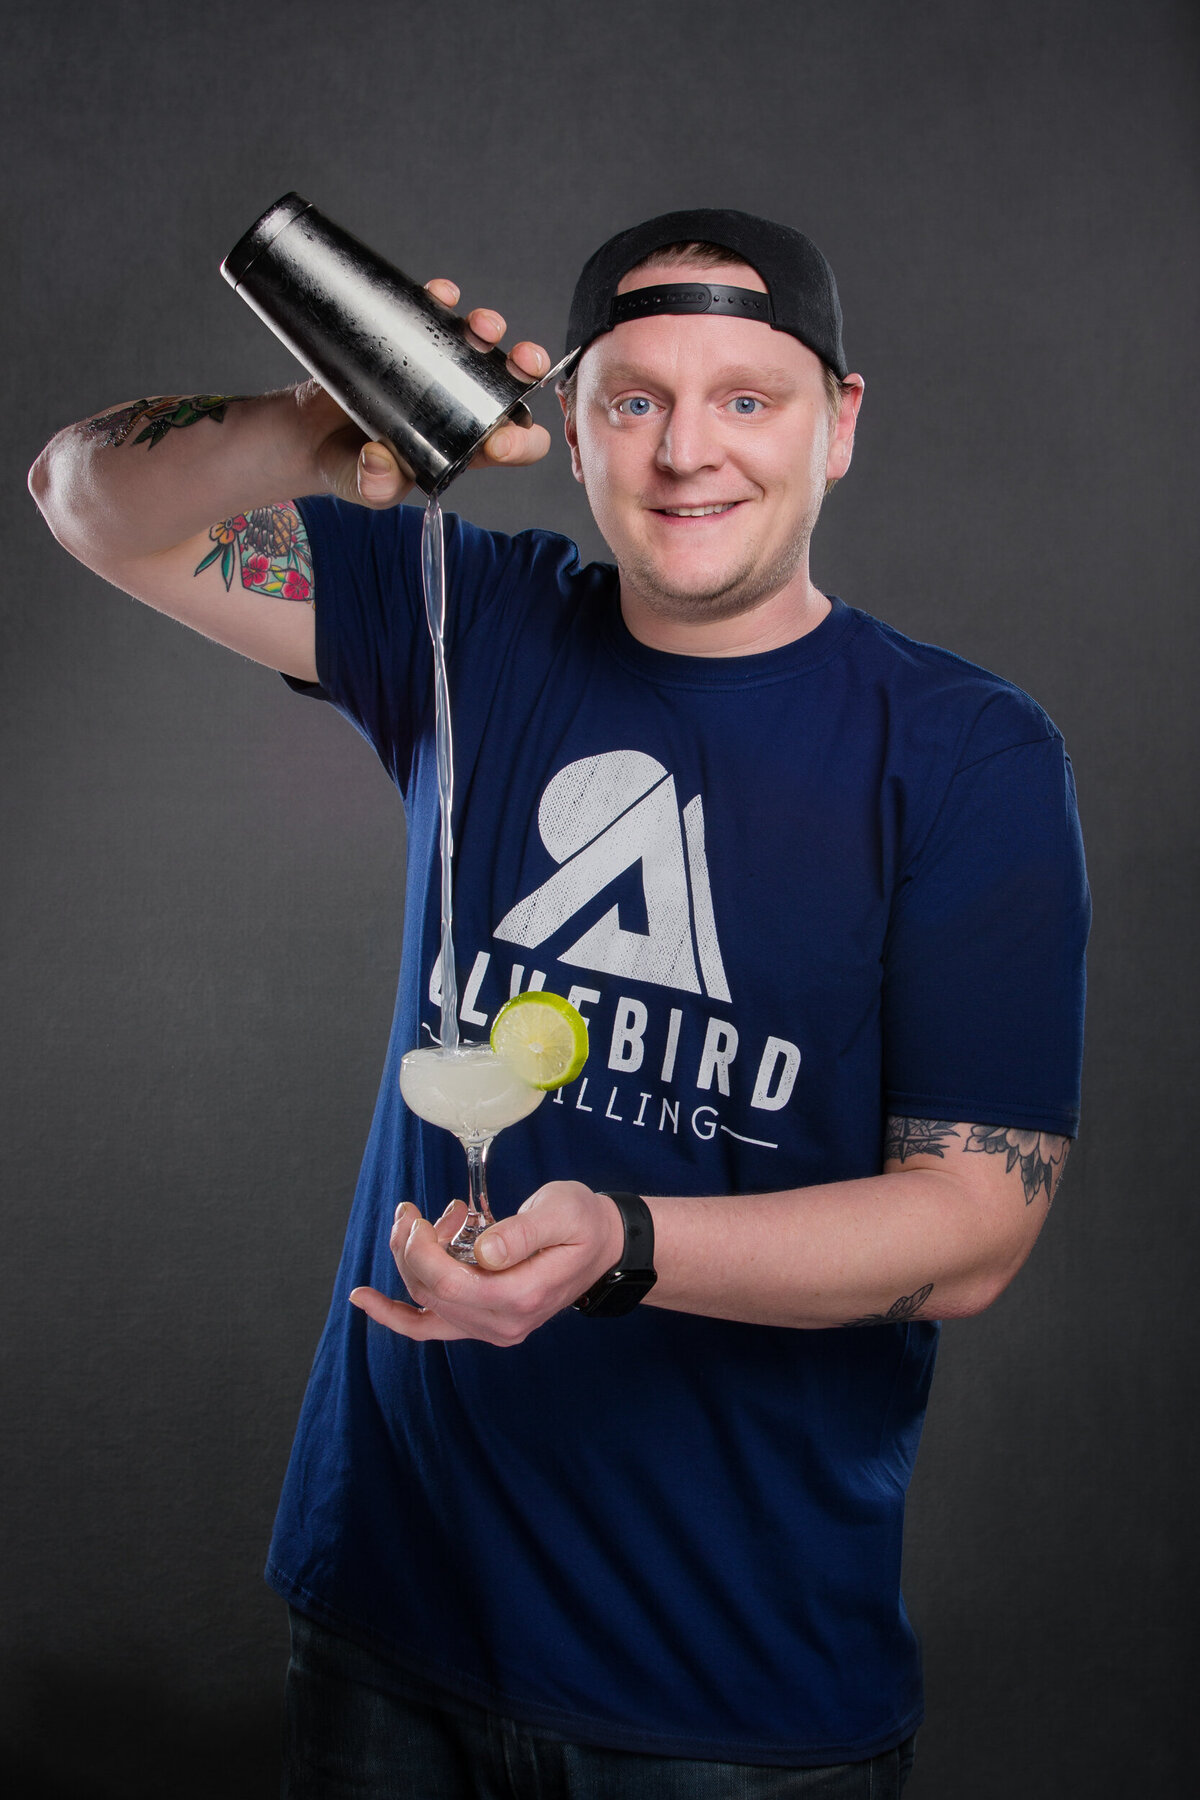 Mixologist pouring a craft cocktail for branding session and headshot photo